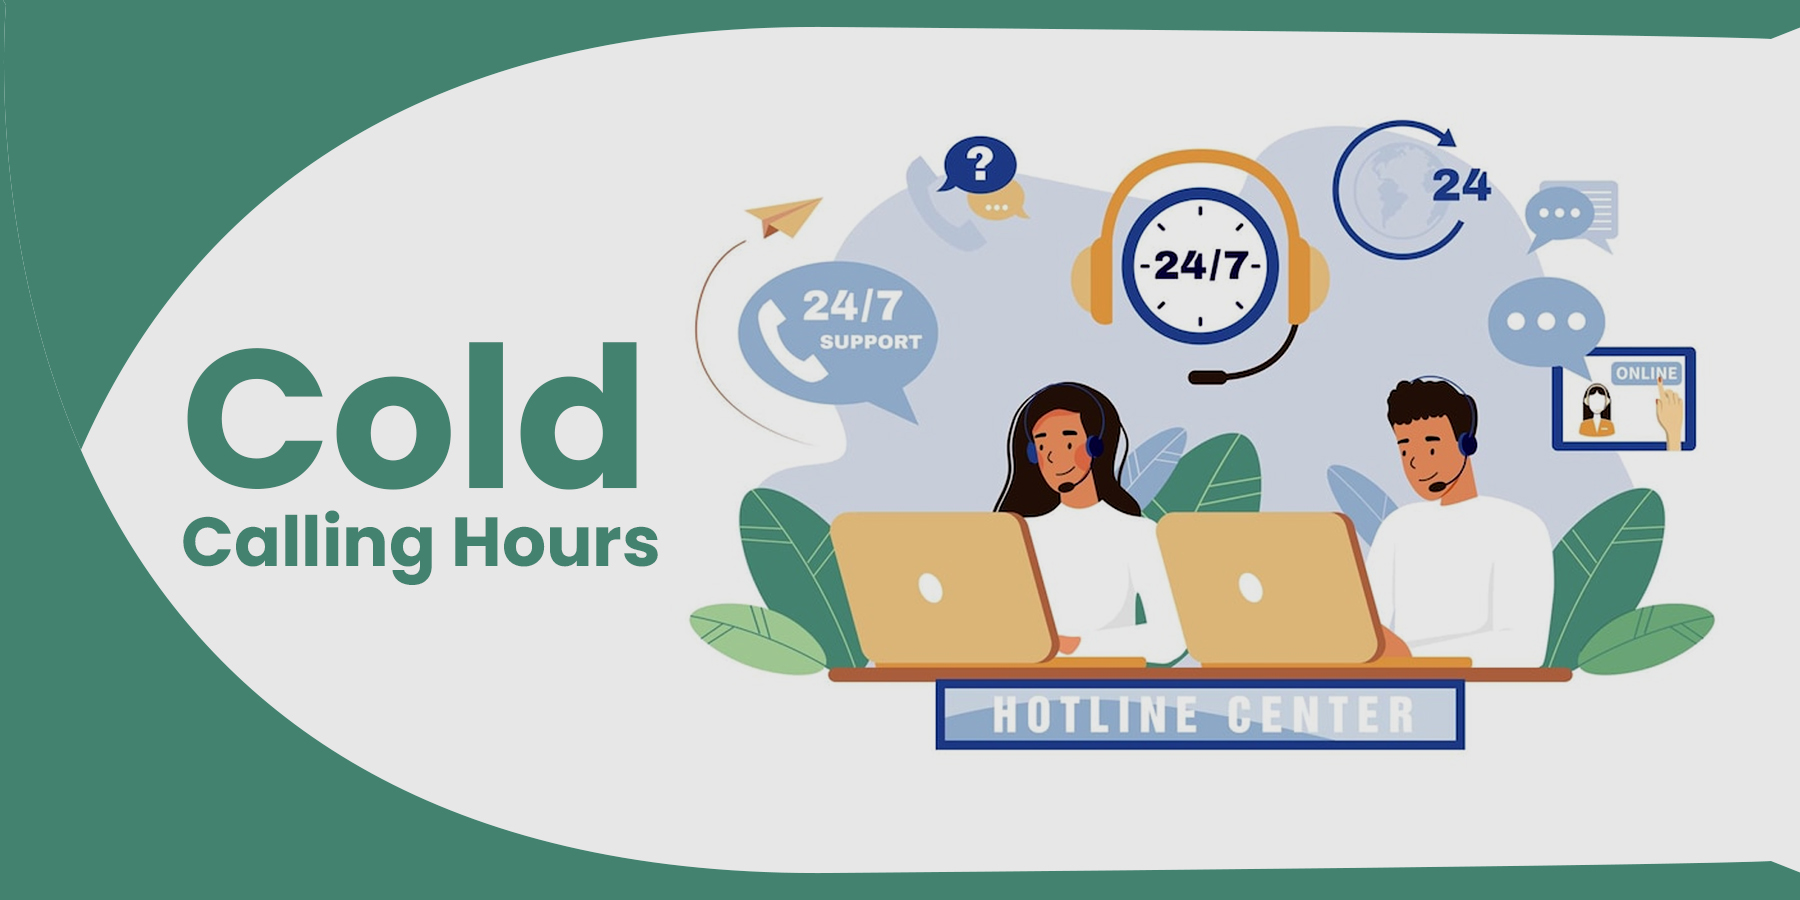 Cold Calling Hours